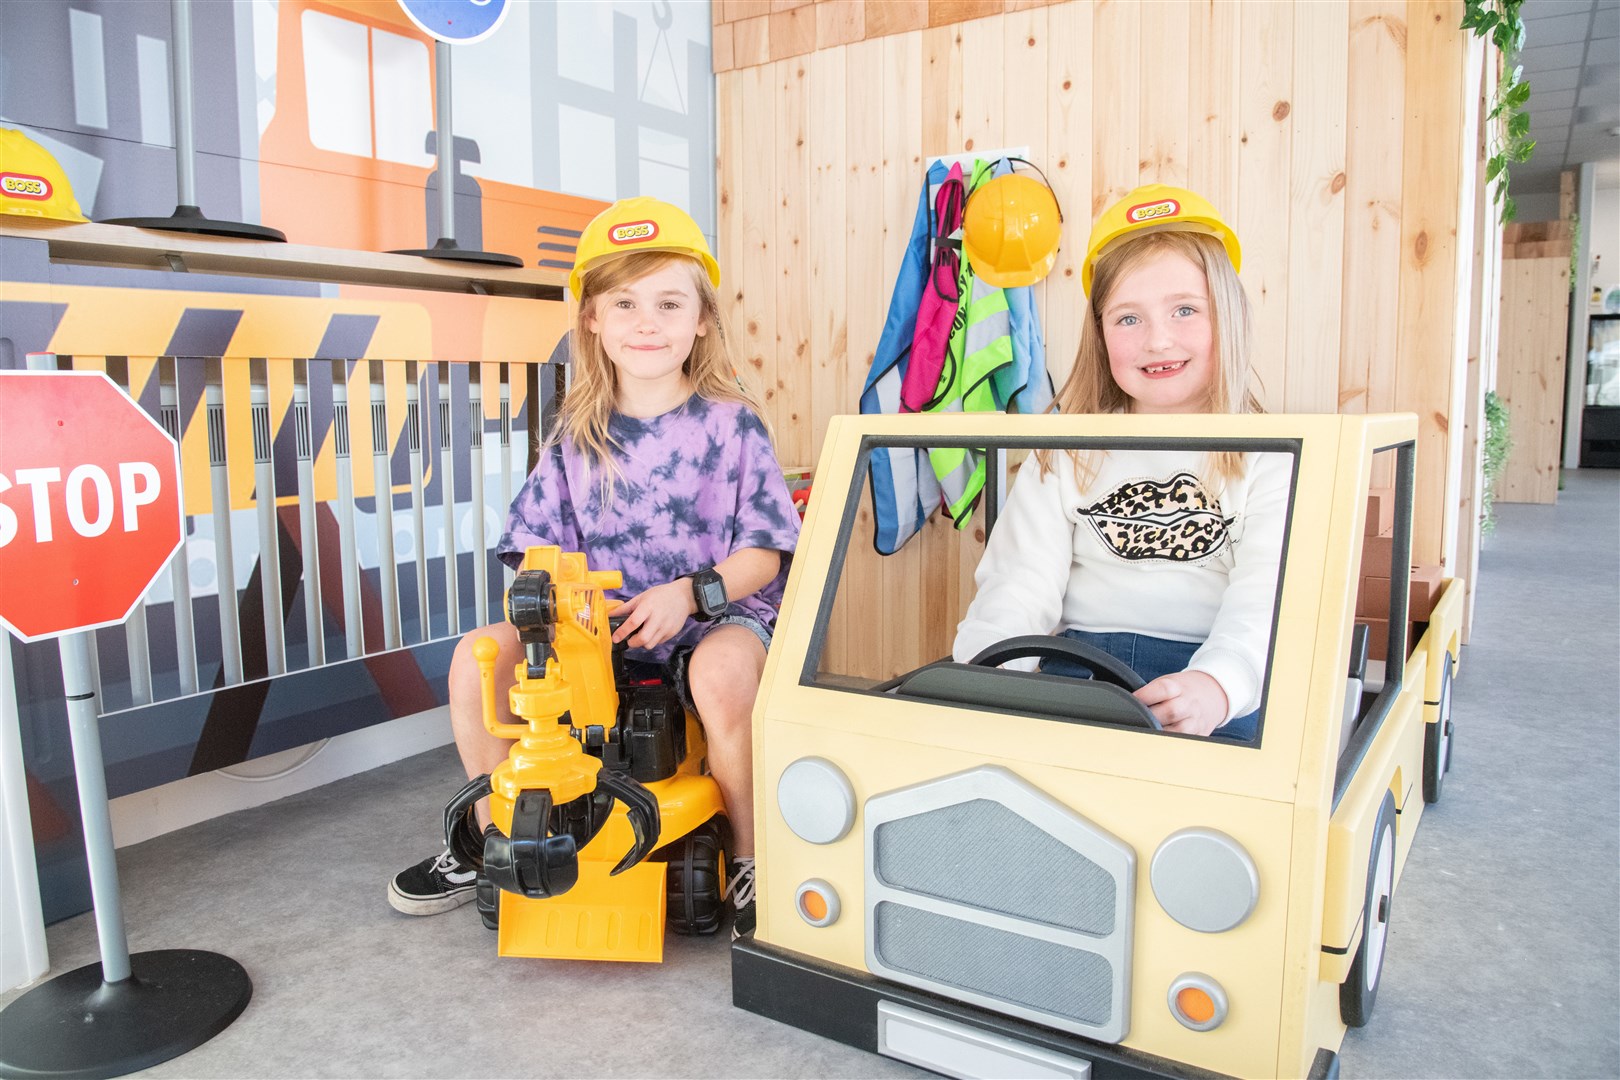 Poppy Larkworthy (left) and Chloe Main have fun in the construction site. Picture: Daniel Forsyth